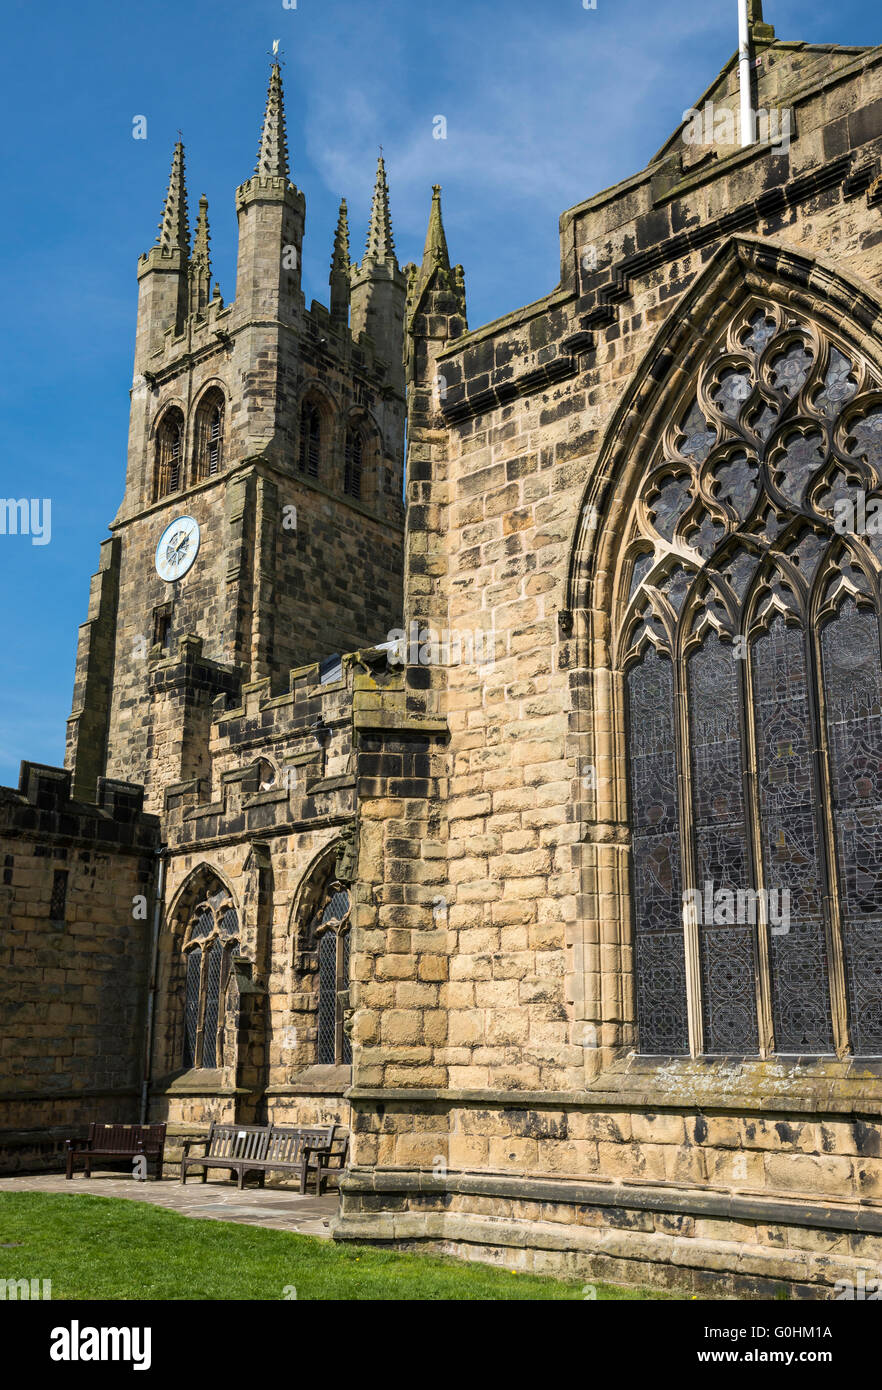 Tideswell church (Cathedral of the Peak) in Derbyshire. A sunny spring day. Stock Photo